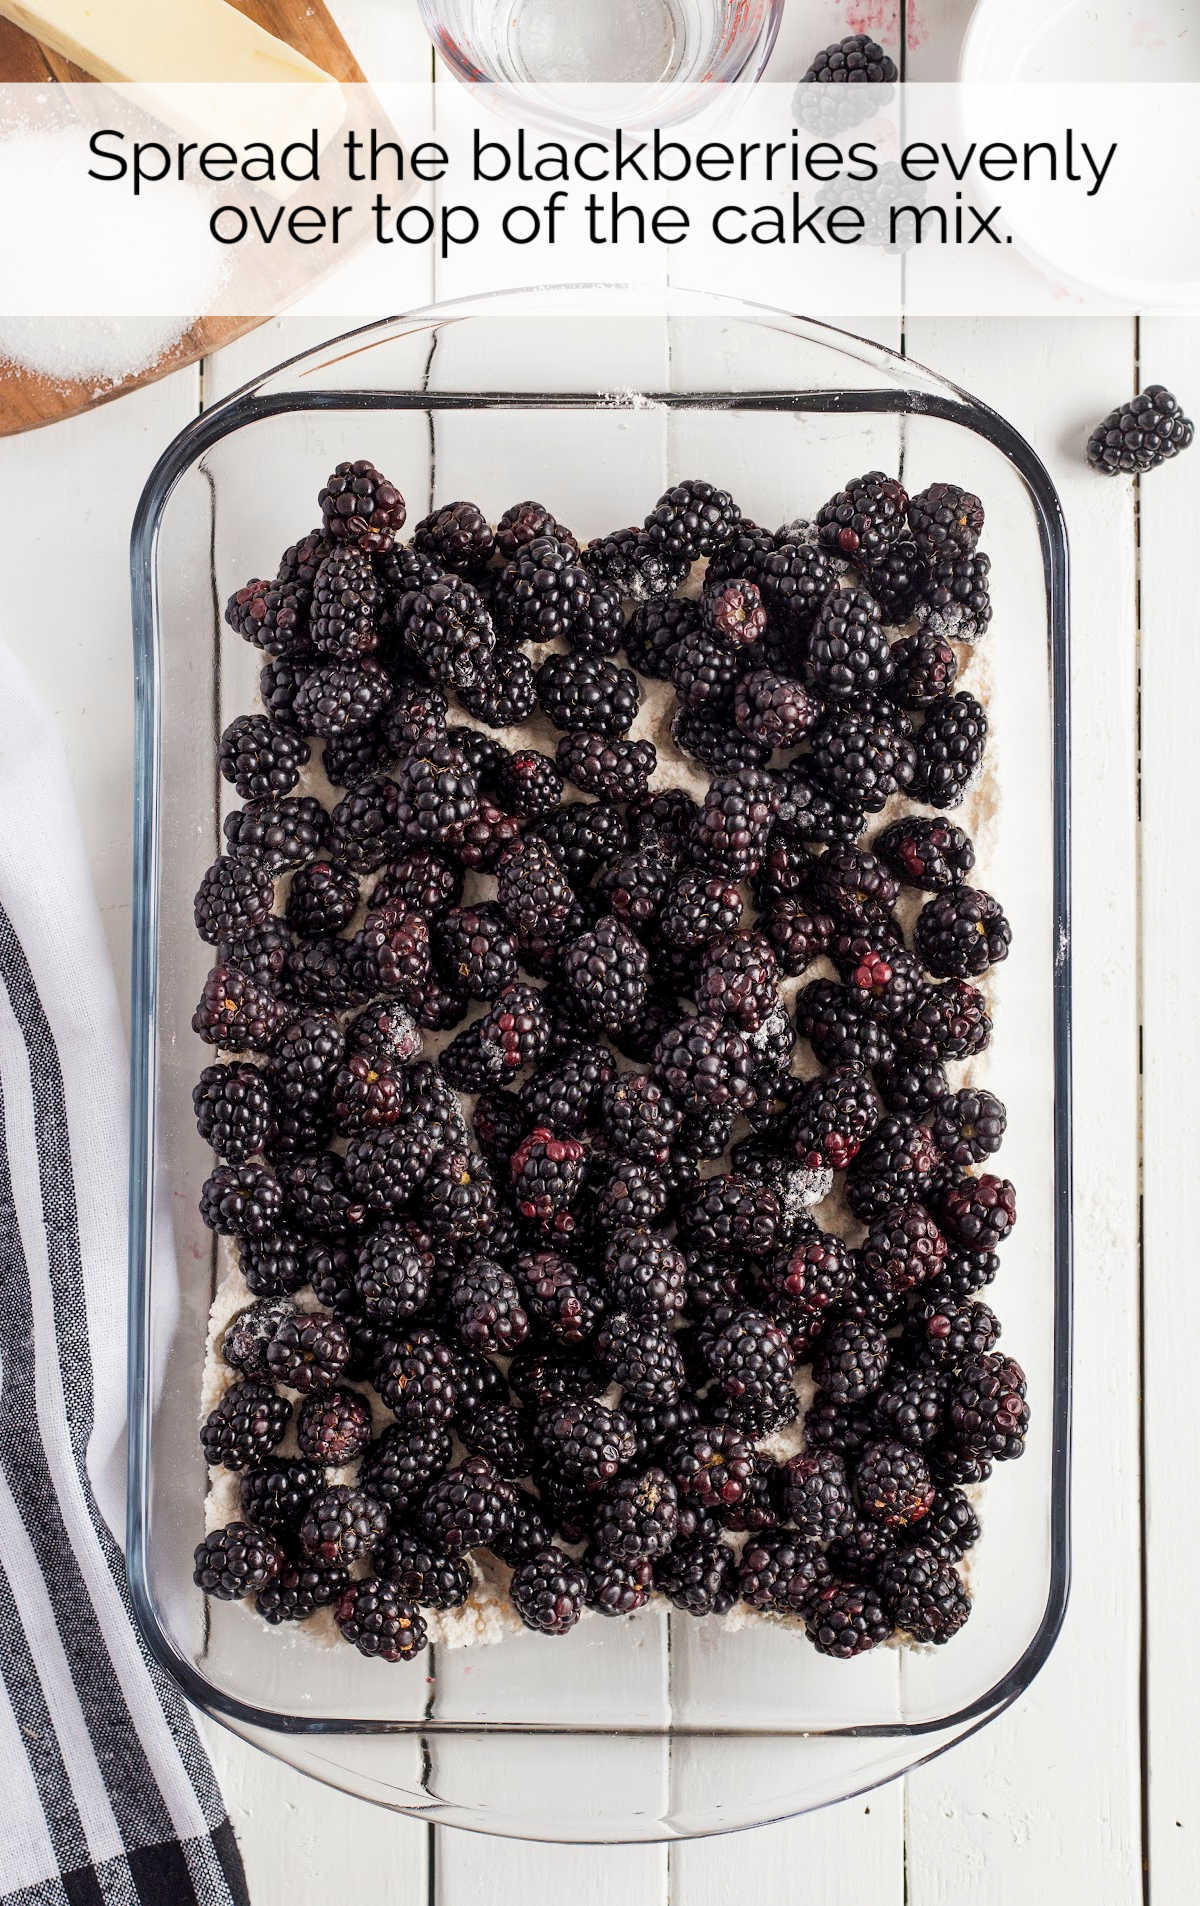 blackberries mixed with cake mix in a baking dish